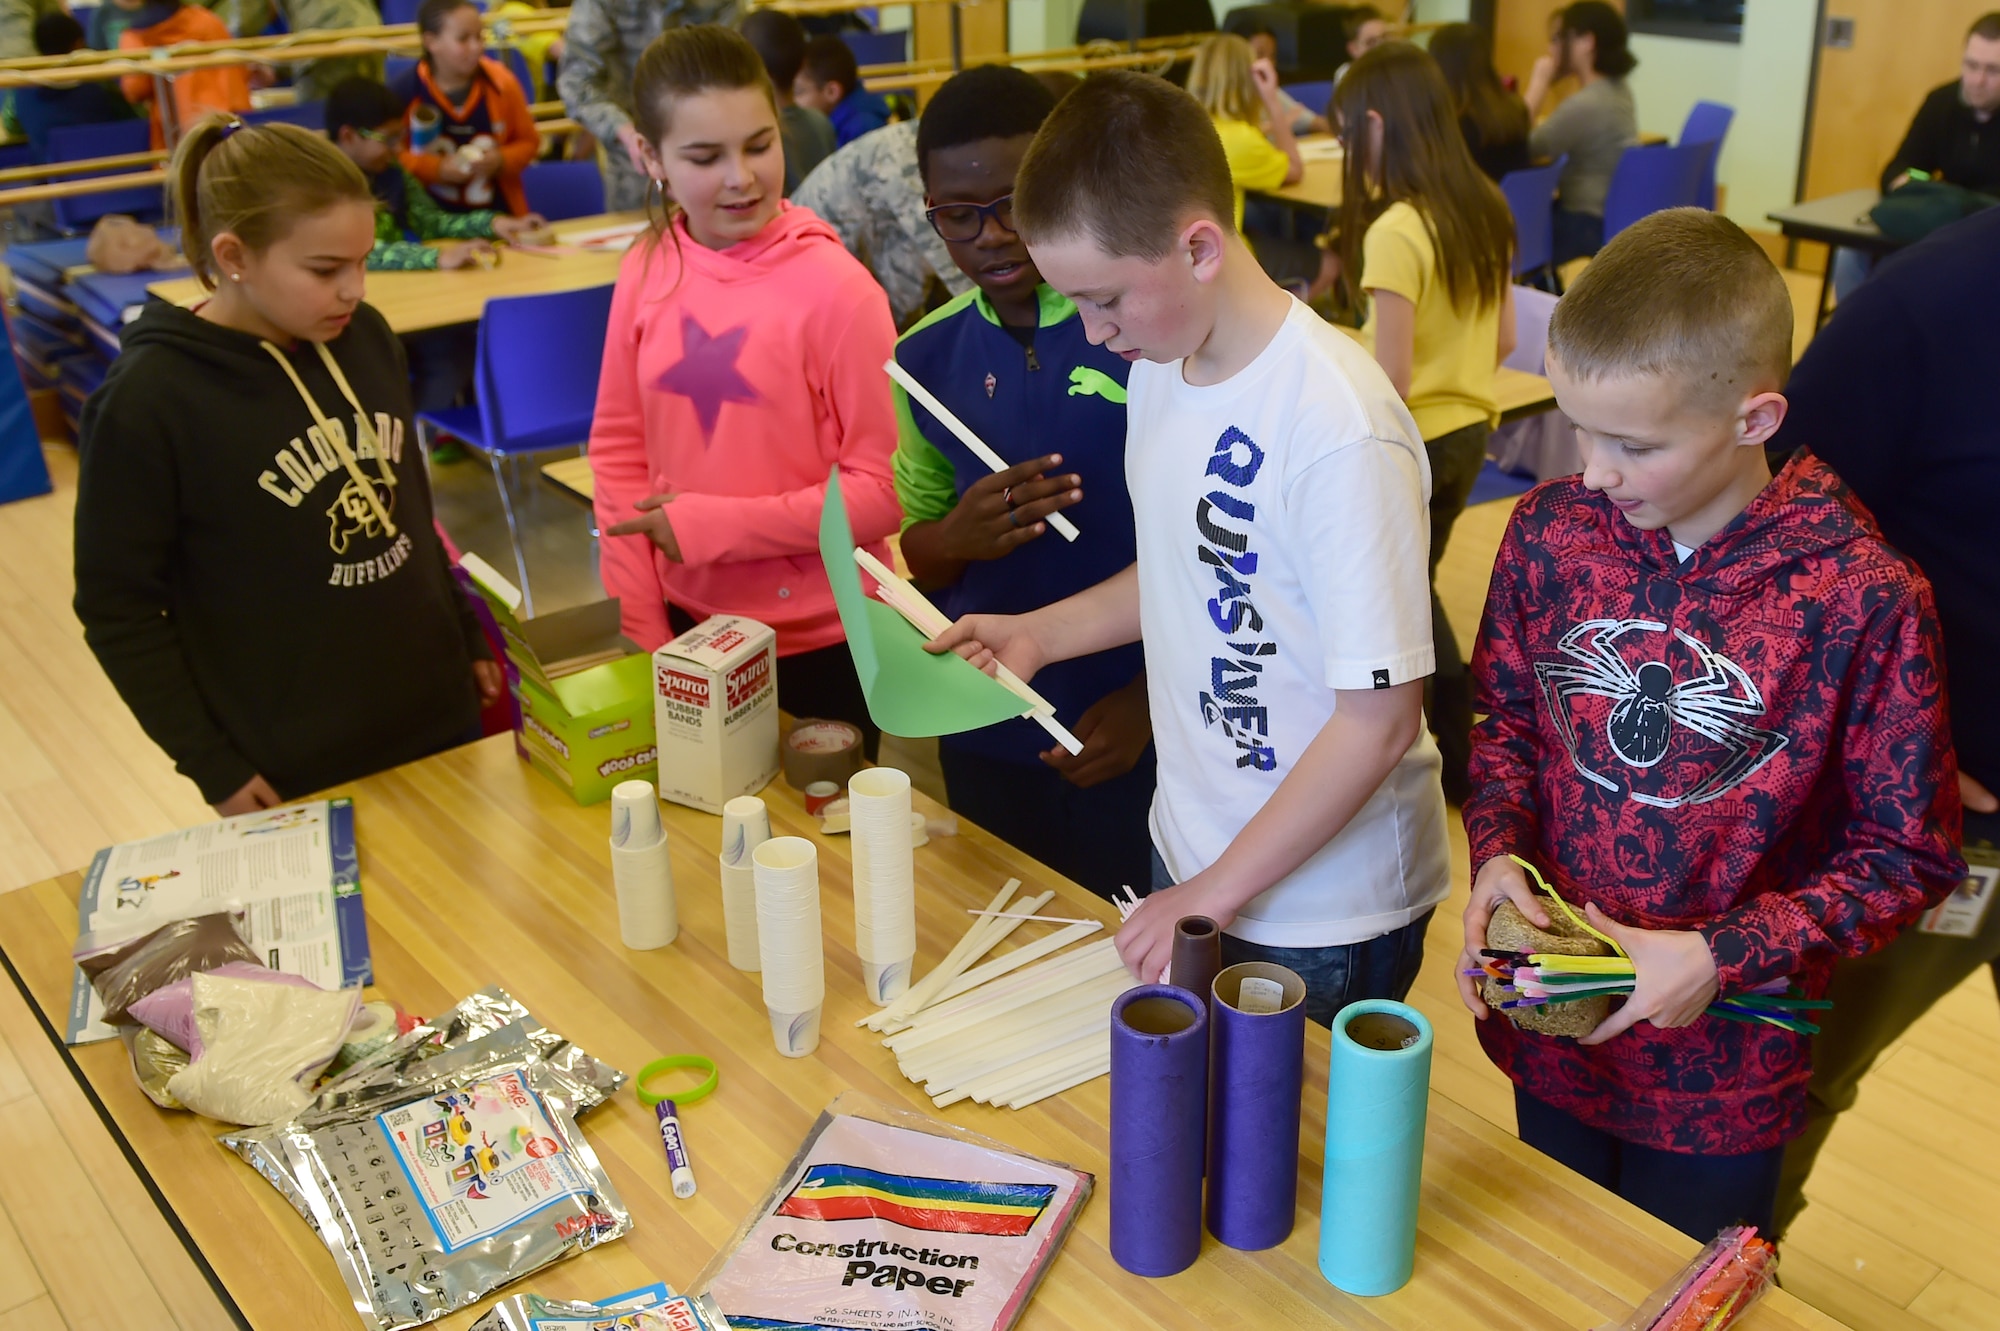 Children gather up supplies to complete a STEM (Science, Technology, Engineering and Math) Camp objective March 31, 2016, at the youth center on Buckley Air Force Base, Colo. Buckley AFB in conjunction with Colorado State University put on this interactive learning camp to get local children involved in the sciences. (U.S. Air Force photo by Airman 1st Class Luke W. Nowakowski/Released)